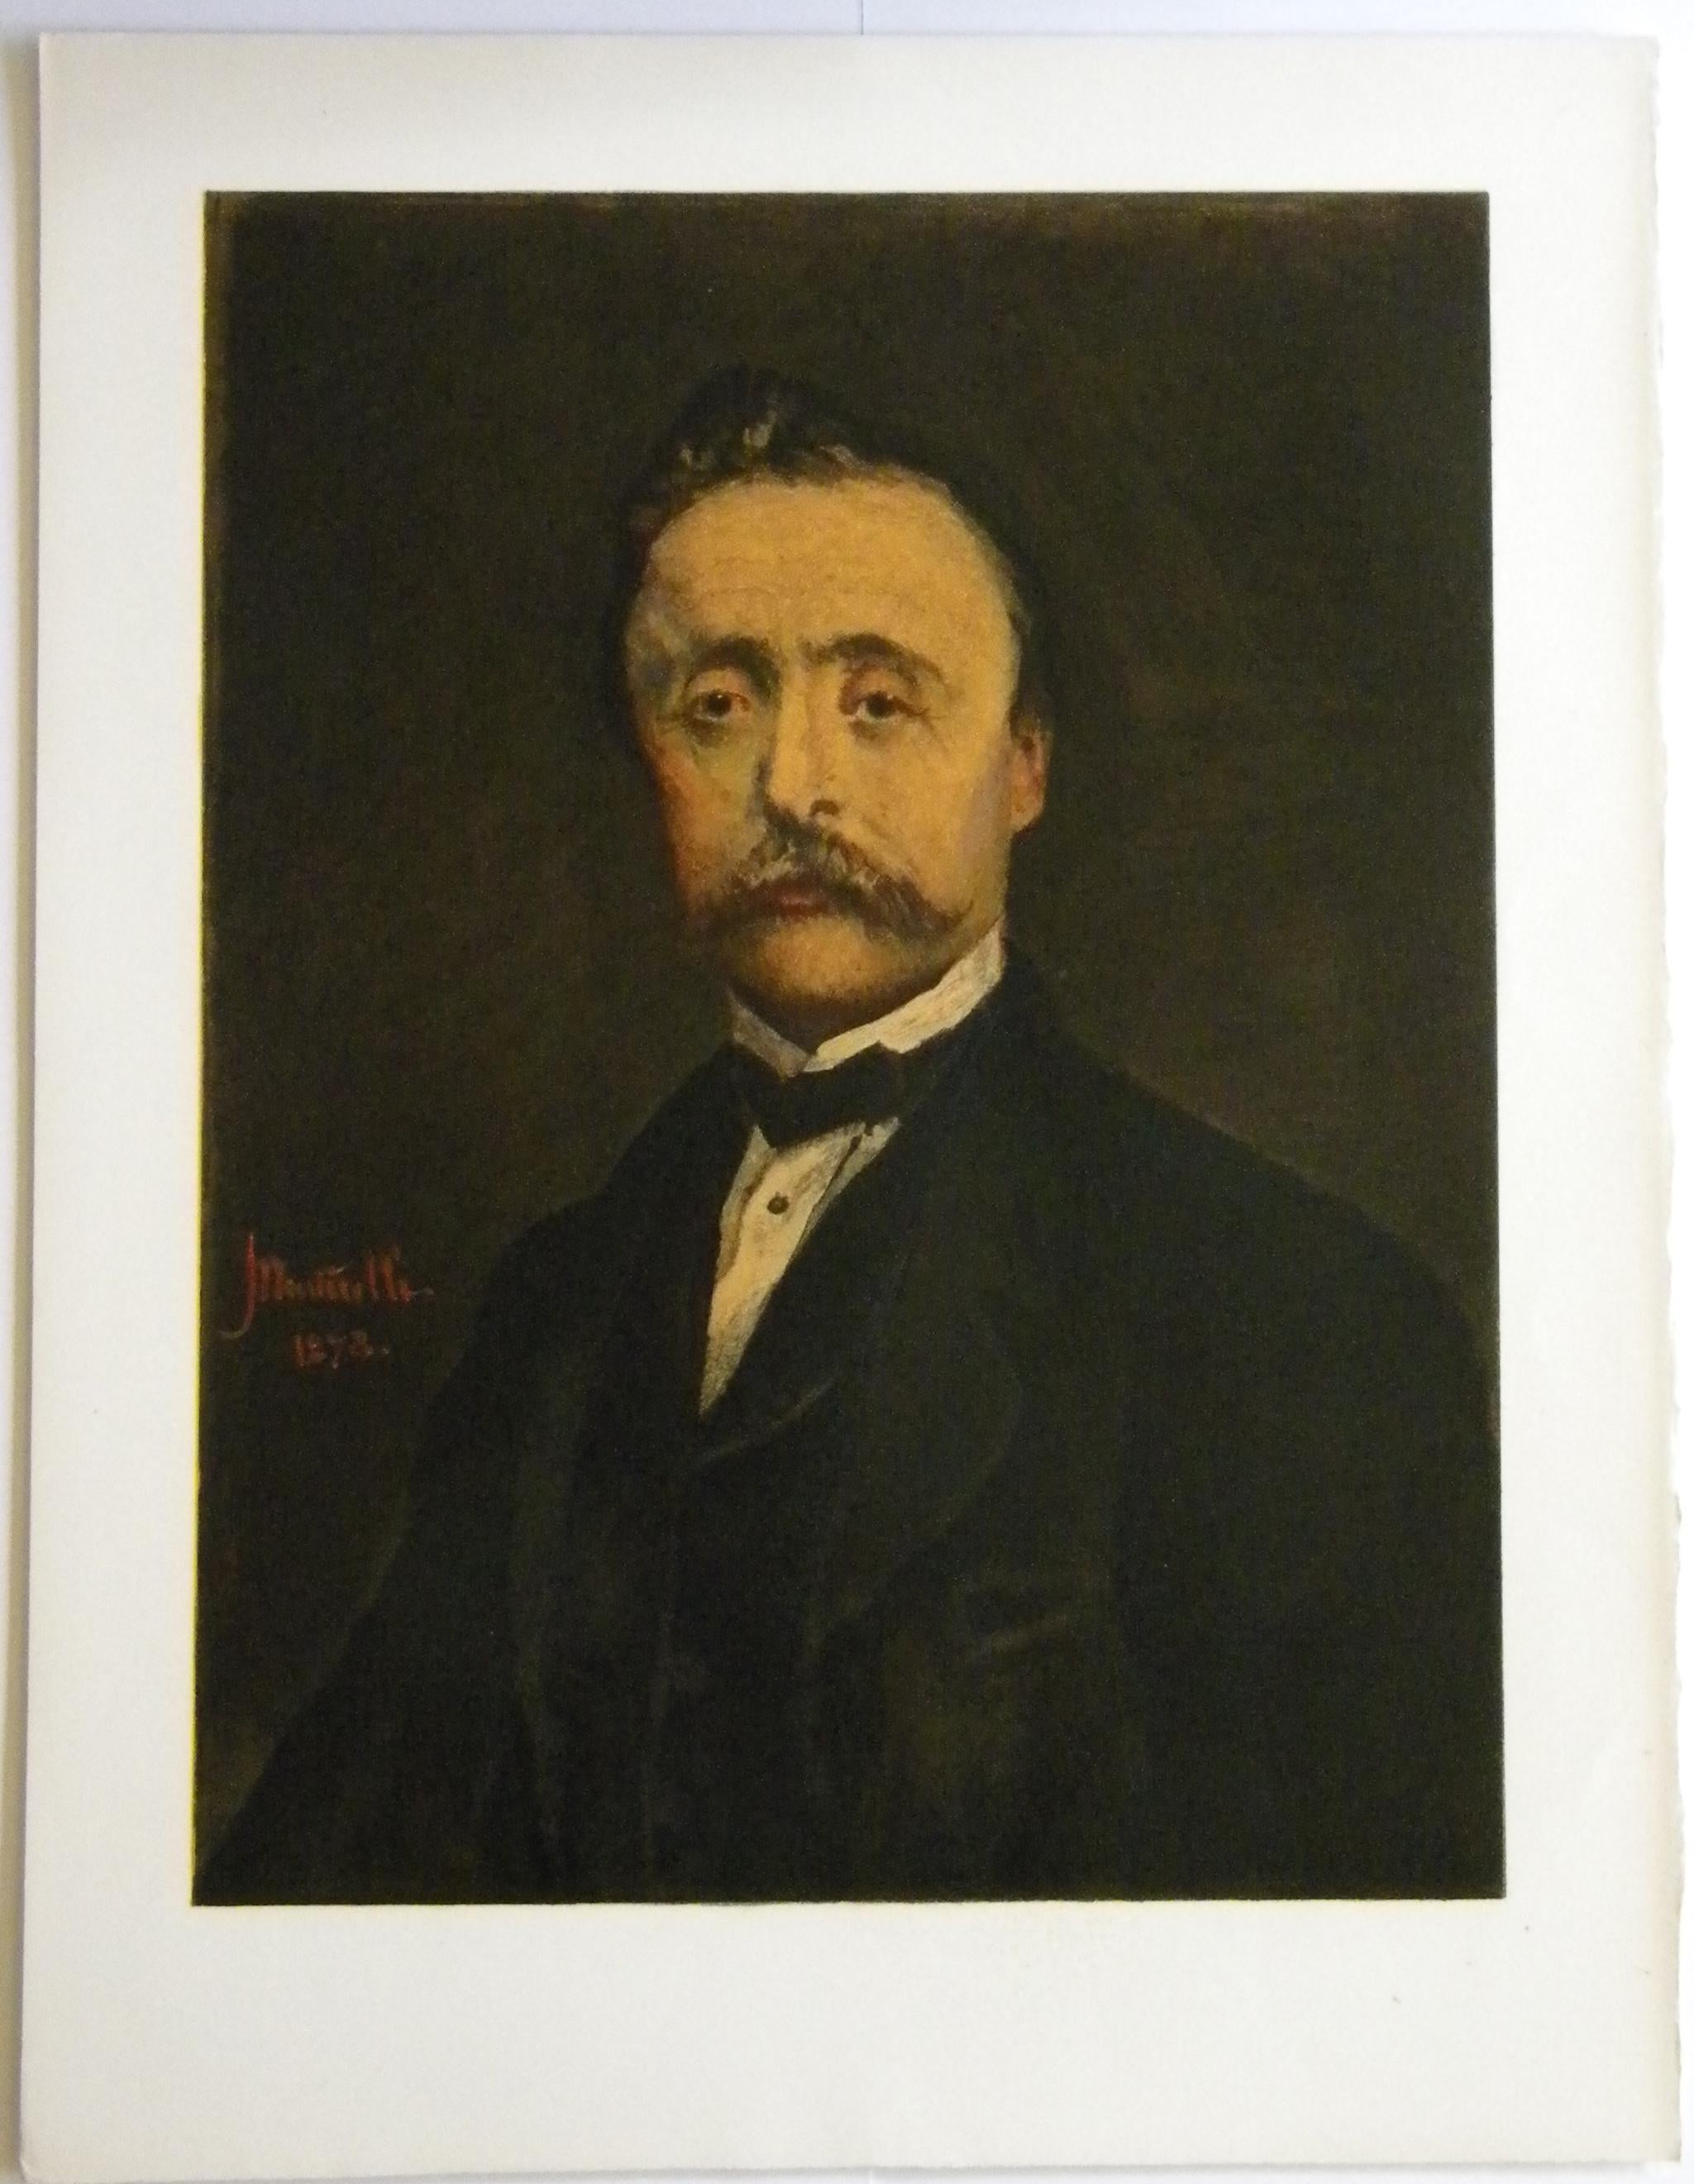 Medium: lithograph (after the 1878 Adolphe Monticelli painting). Printed in Paris on Arches paper at the Mourlot studio in 1973 in an edition of 1000 for the Collection Pierre Lévy deluxe portfolio. The image measures 20 1/2 x 15 1/2 inches (520 x